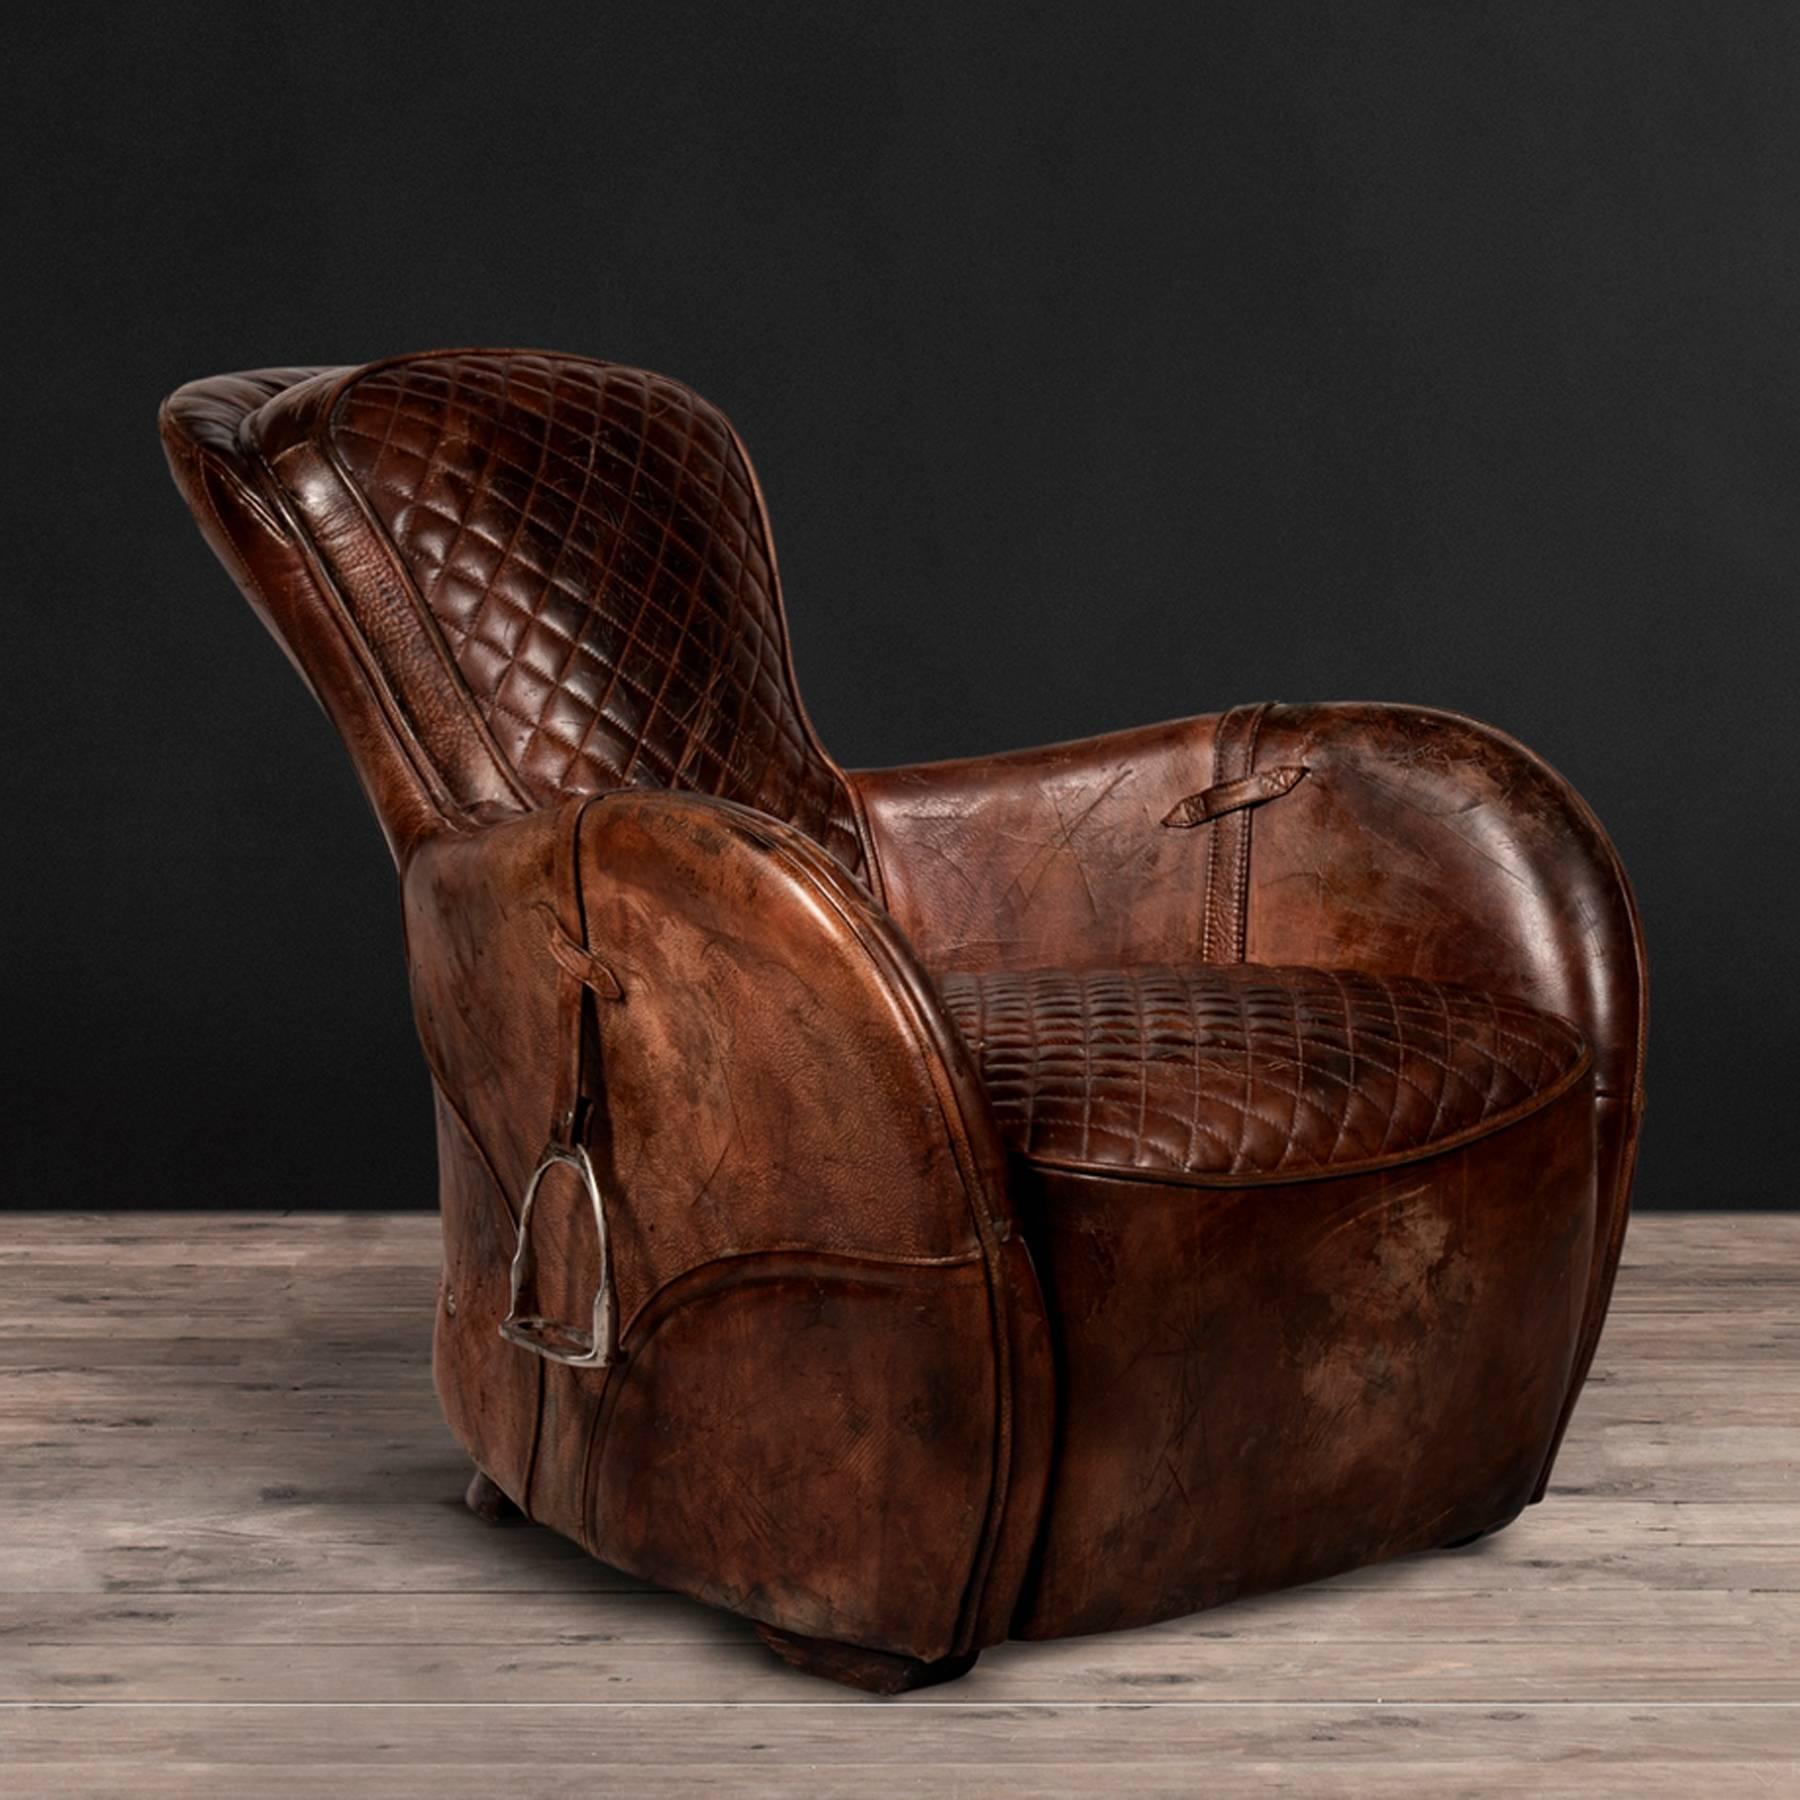 Armchair saddle old brown in 
vintage brown leather with stirrups
and handcrafted leather.
